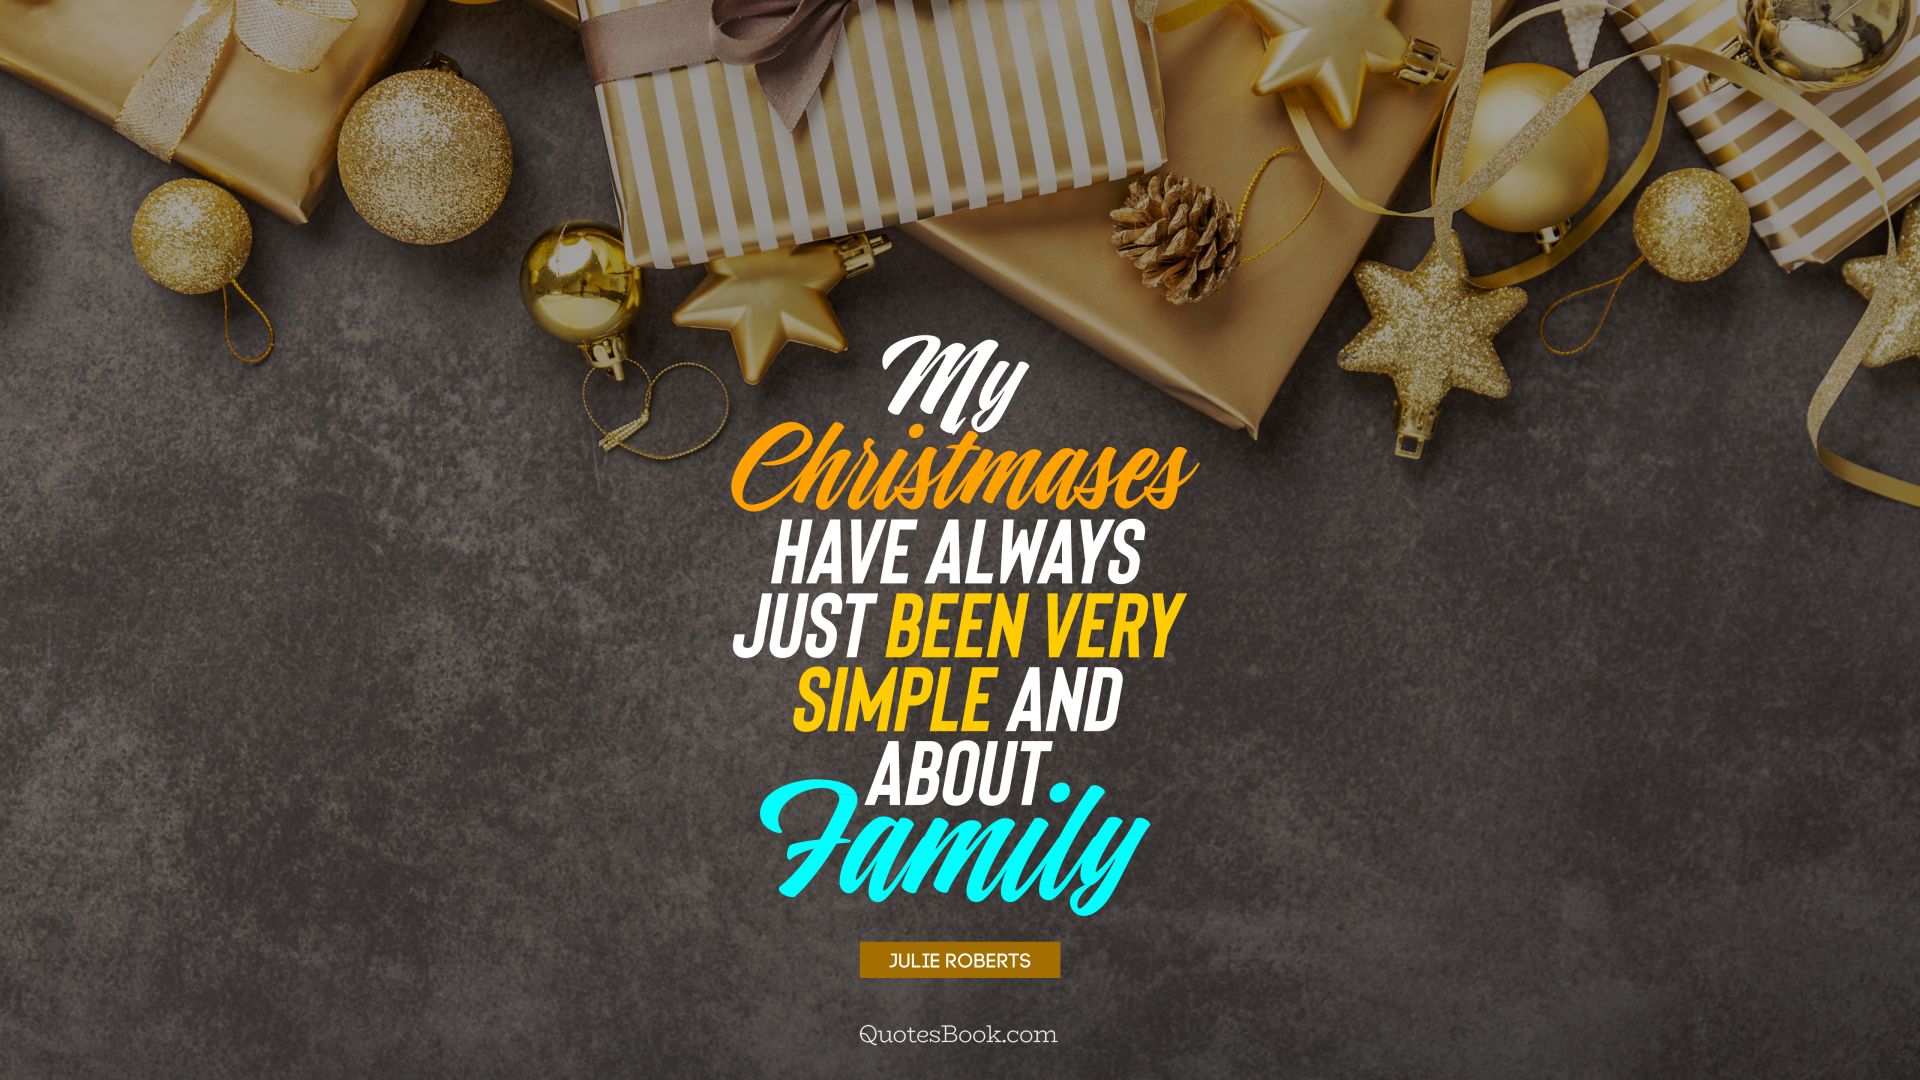 My Christmases have always just been very simple and about family. - Quote by Julie Roberts